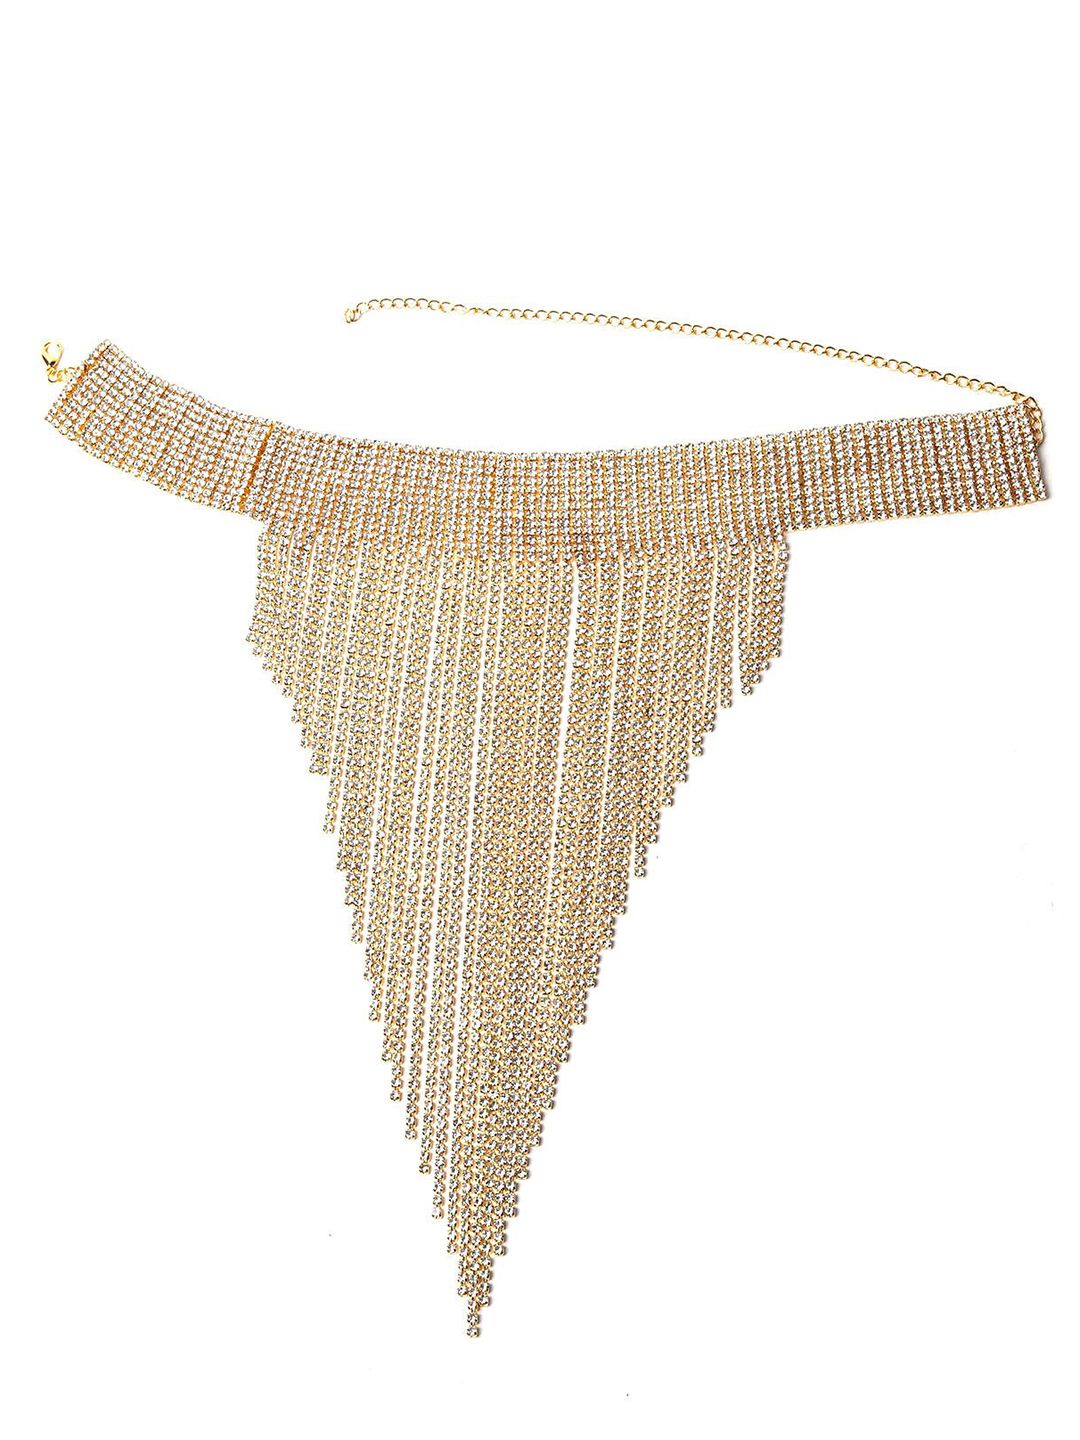 ODETTE Gold-Toned & White Stone Studded Tasselled Necklace Price in India